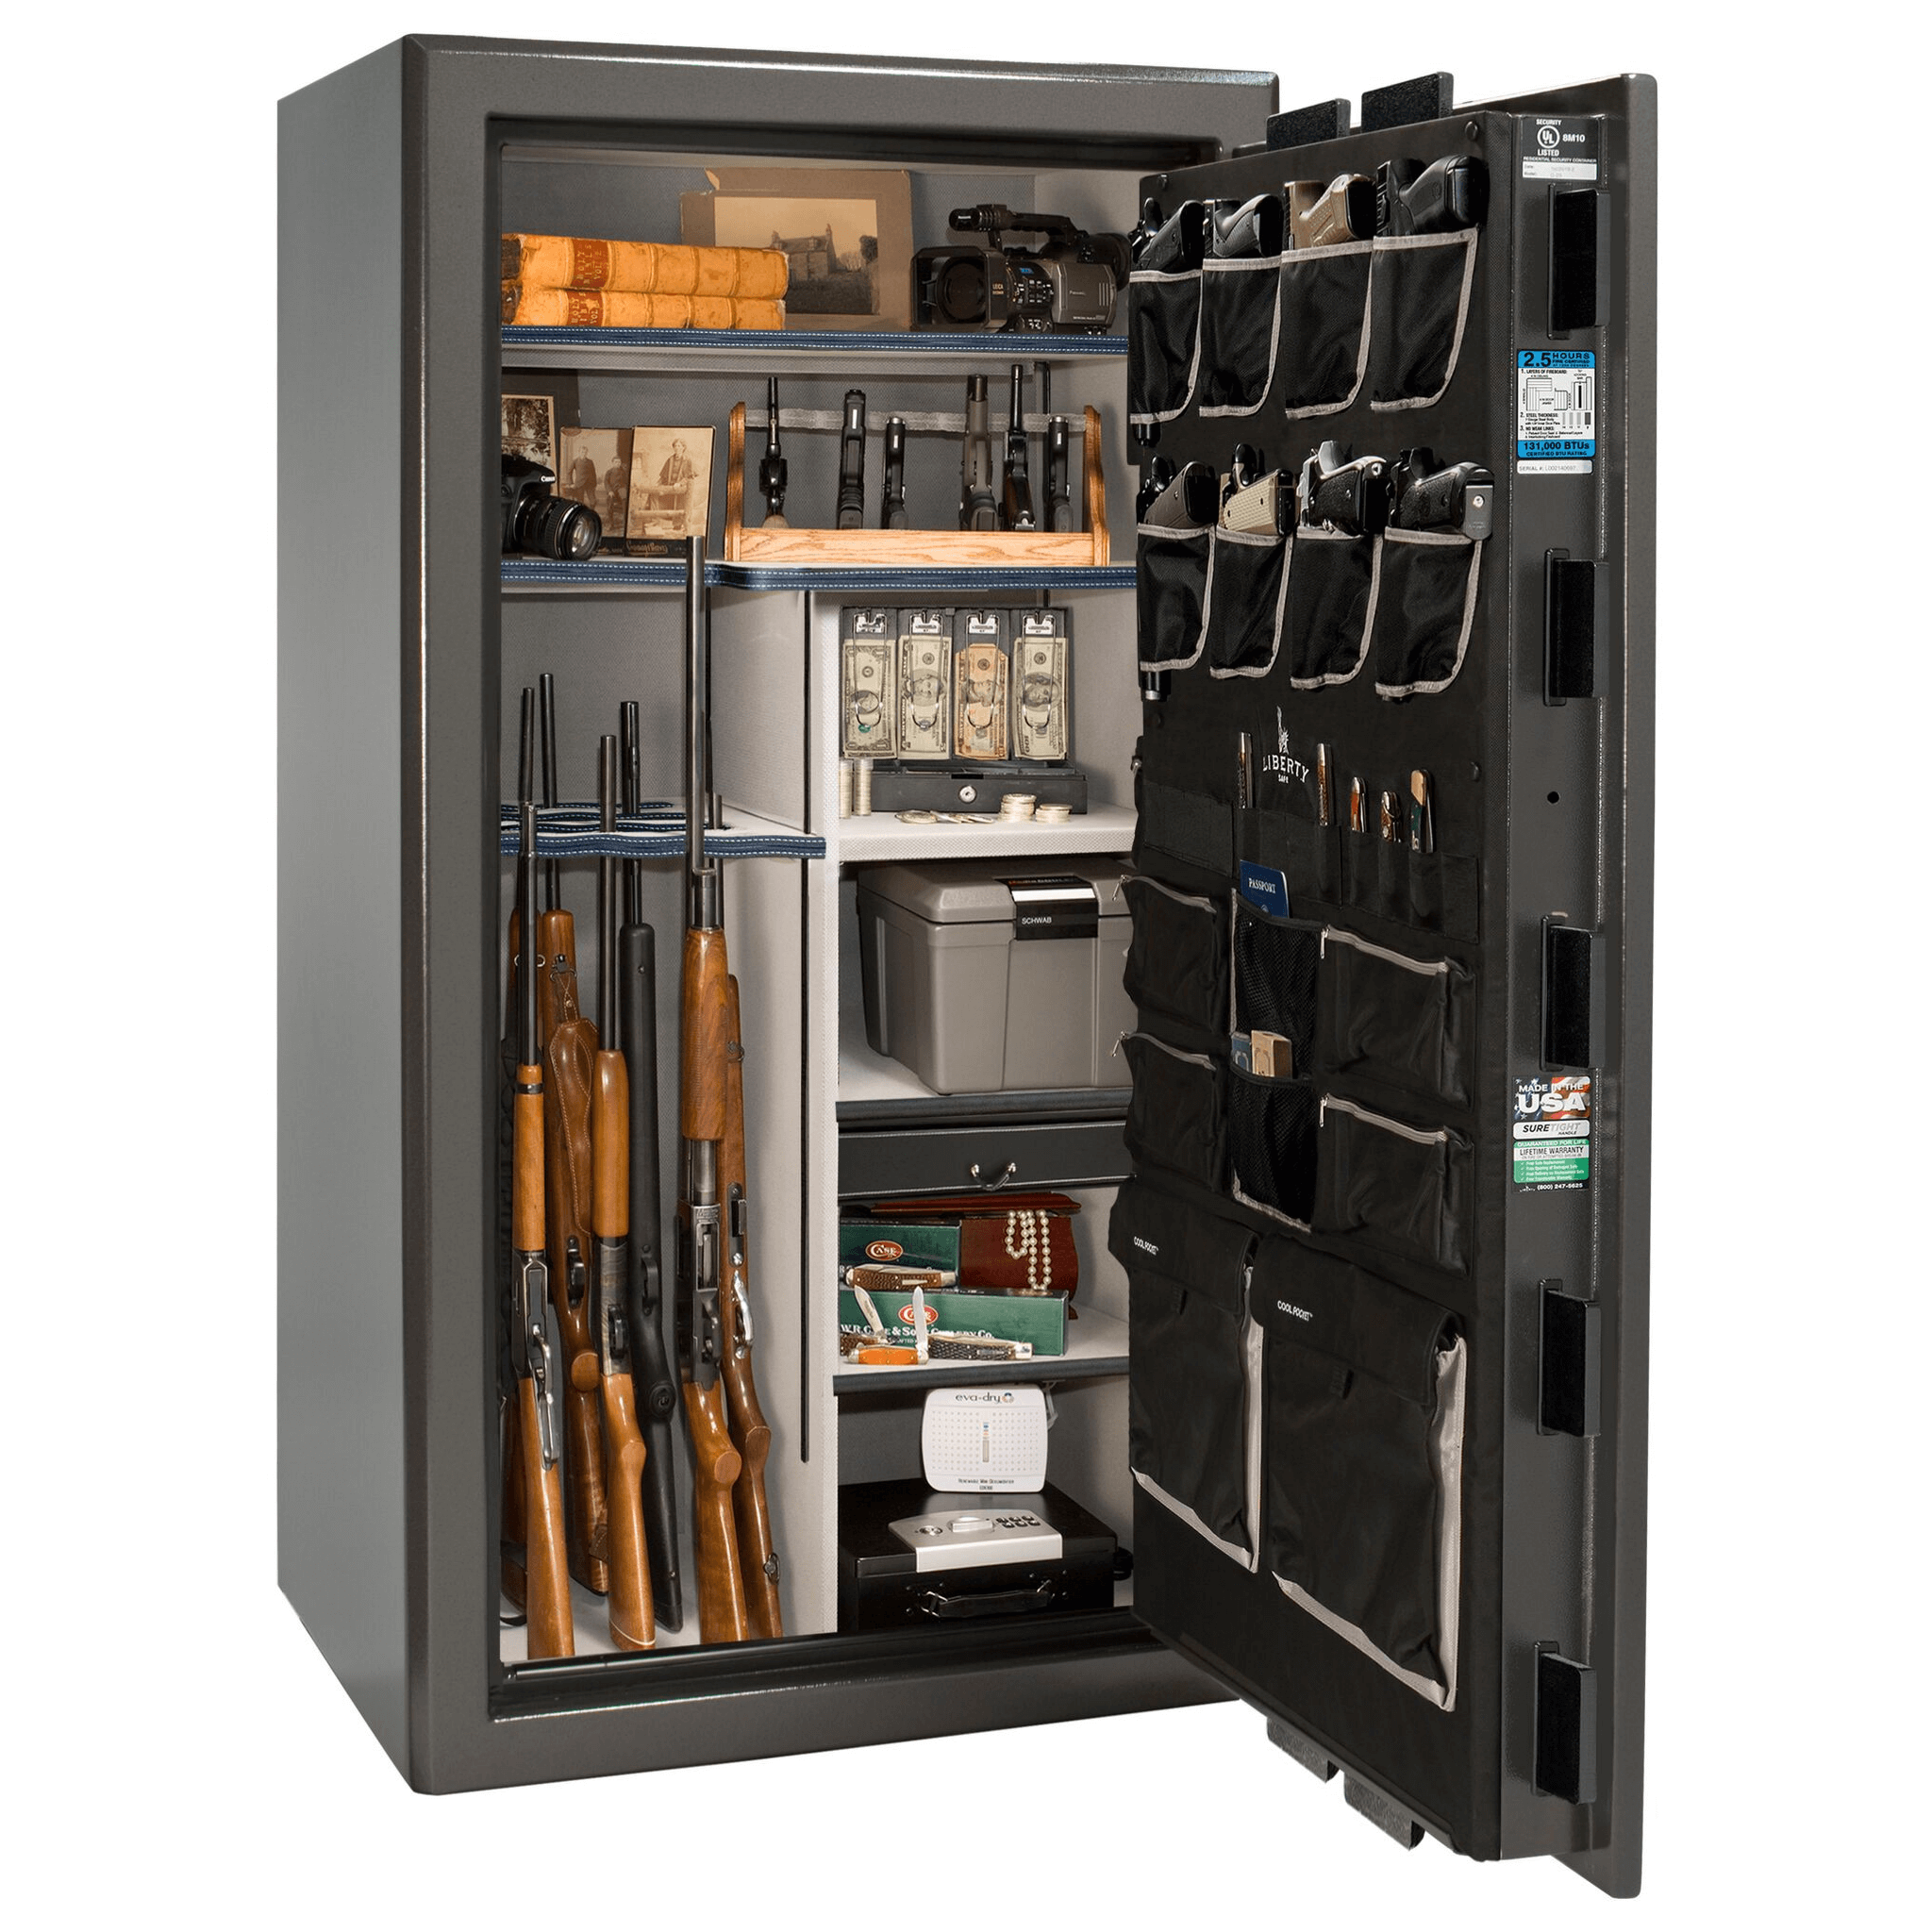 Presidential Series | Level 8 Security | 2.5 Hours Fire Protection | 40 | Dimensions: 66.5"(H) x 36.25"(W) x 32"(D) | Gray Marble | Black Chrome Hardware | Electronic Lock